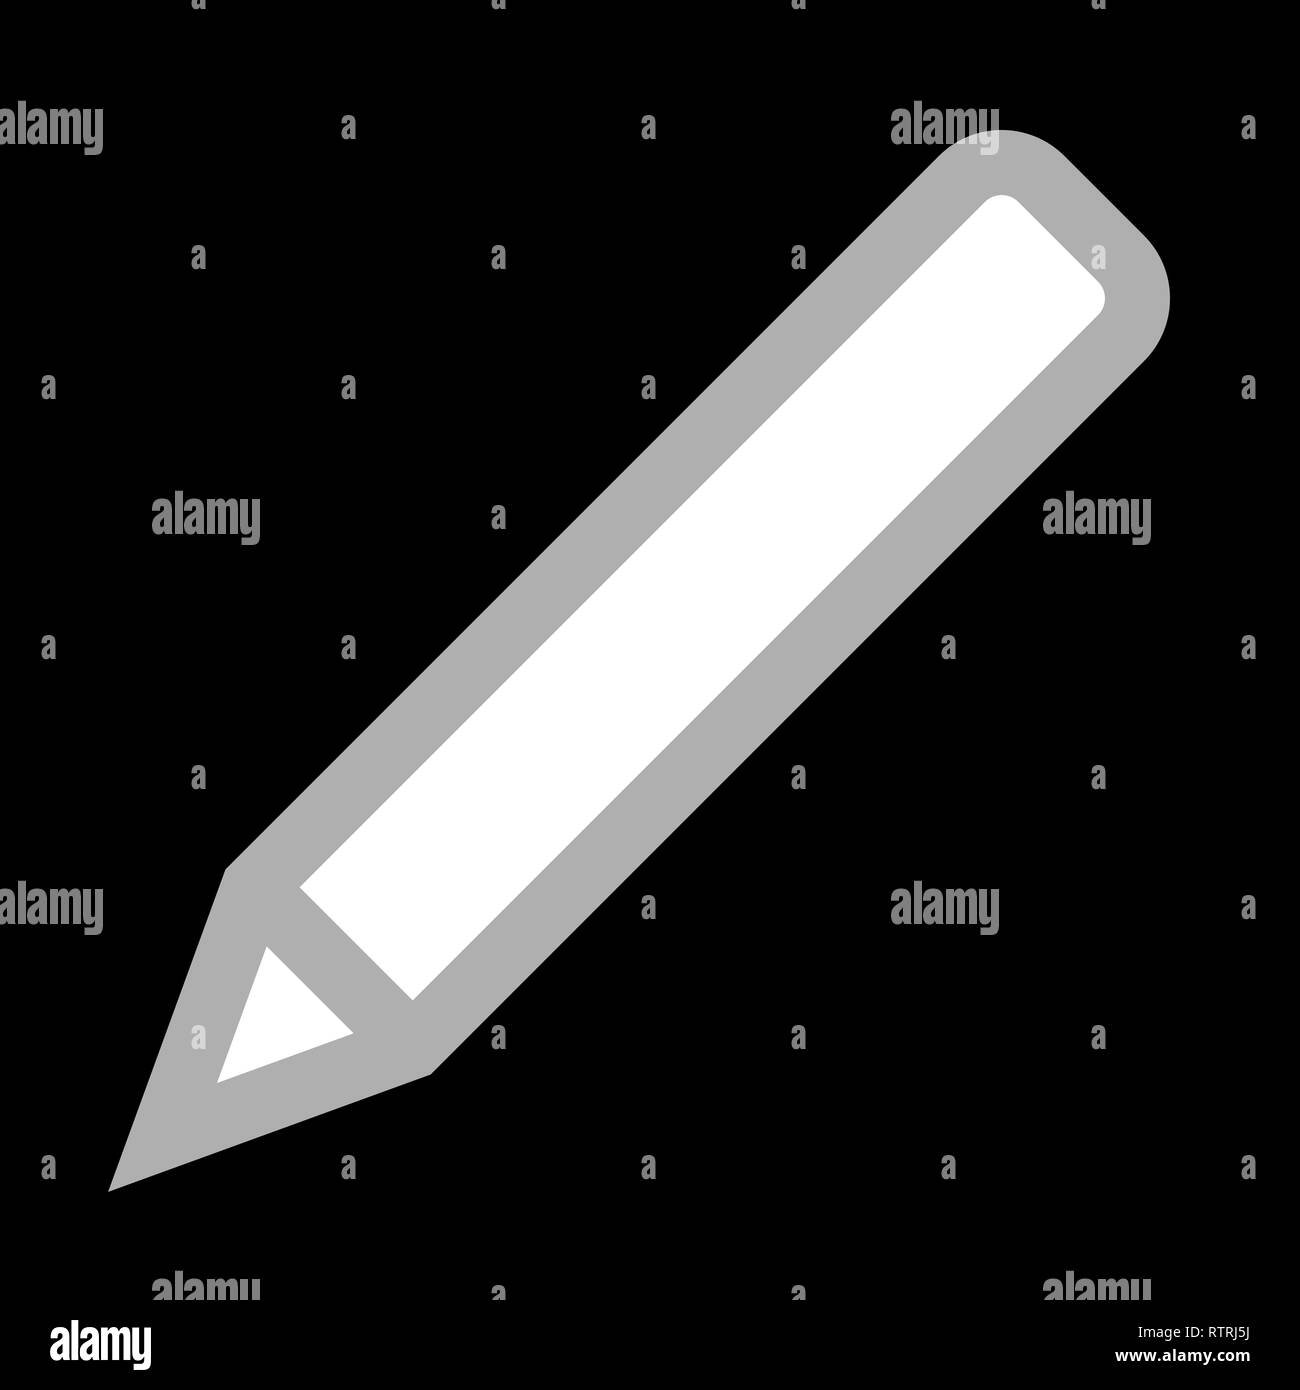 https://c8.alamy.com/comp/RTRJ5J/pencil-symbol-icon-white-simple-with-outline-isolated-vector-illustration-RTRJ5J.jpg